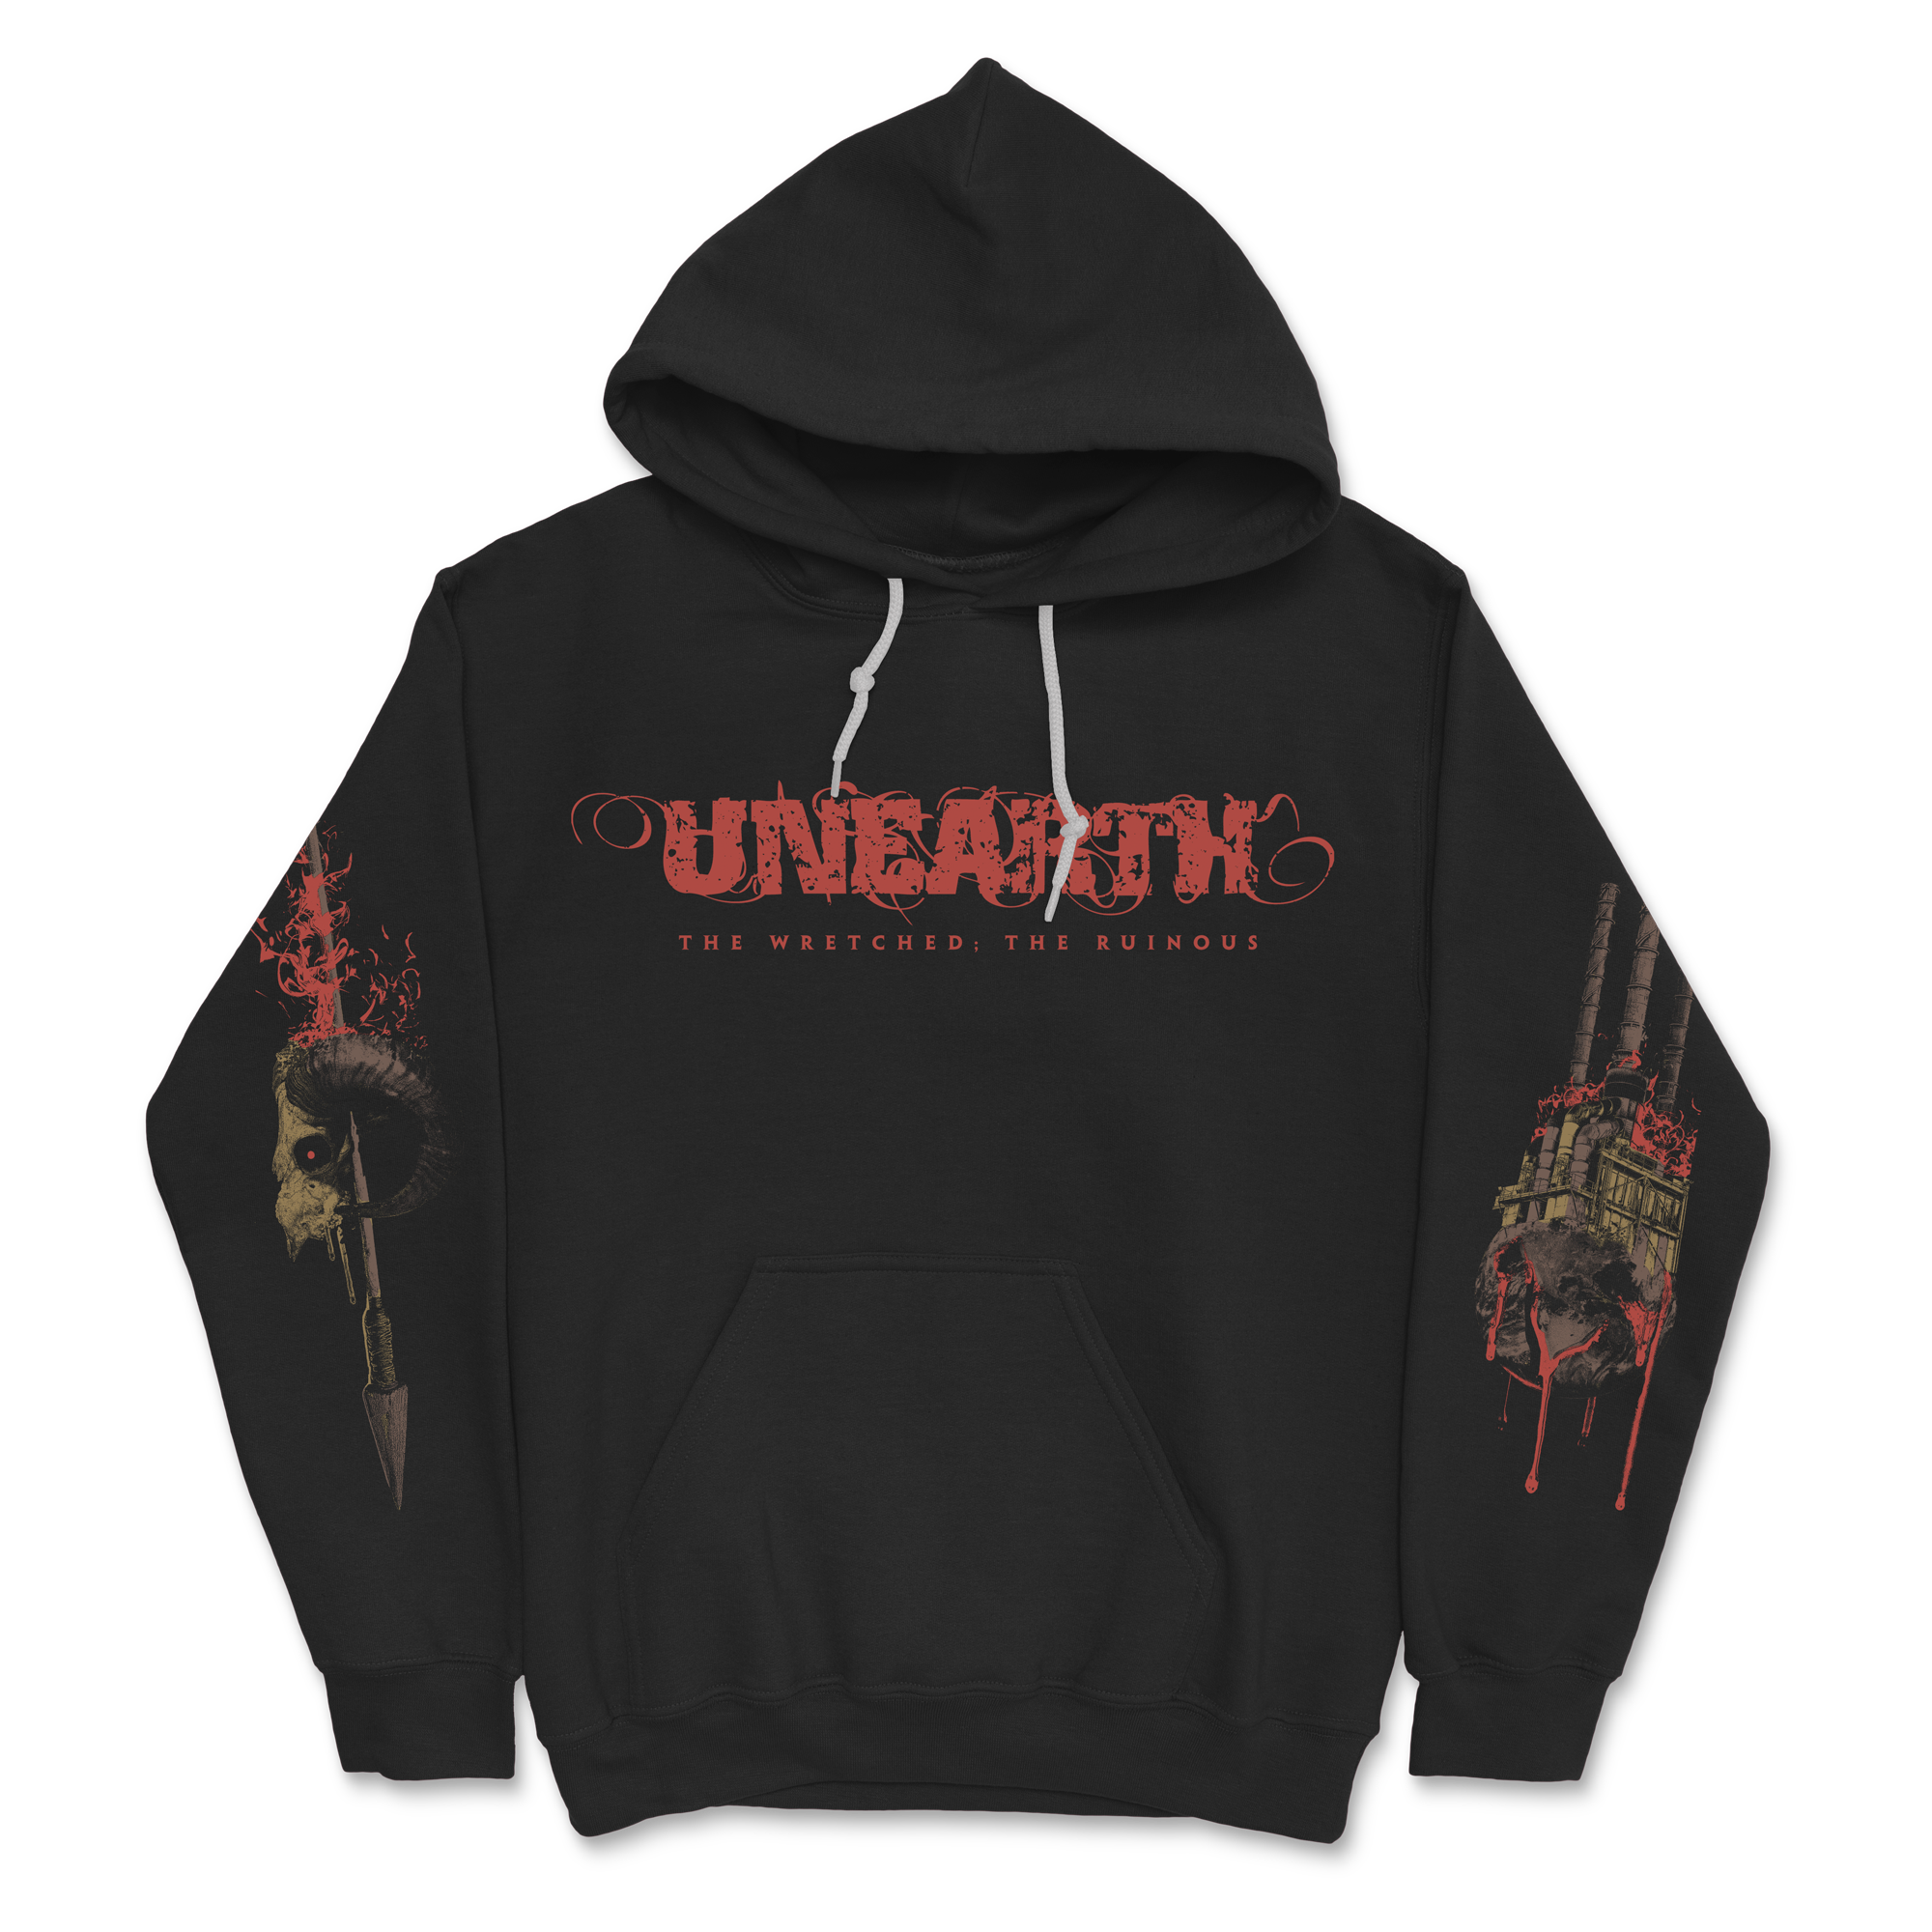 The Wretched ; The Ruinous Album Hoodie